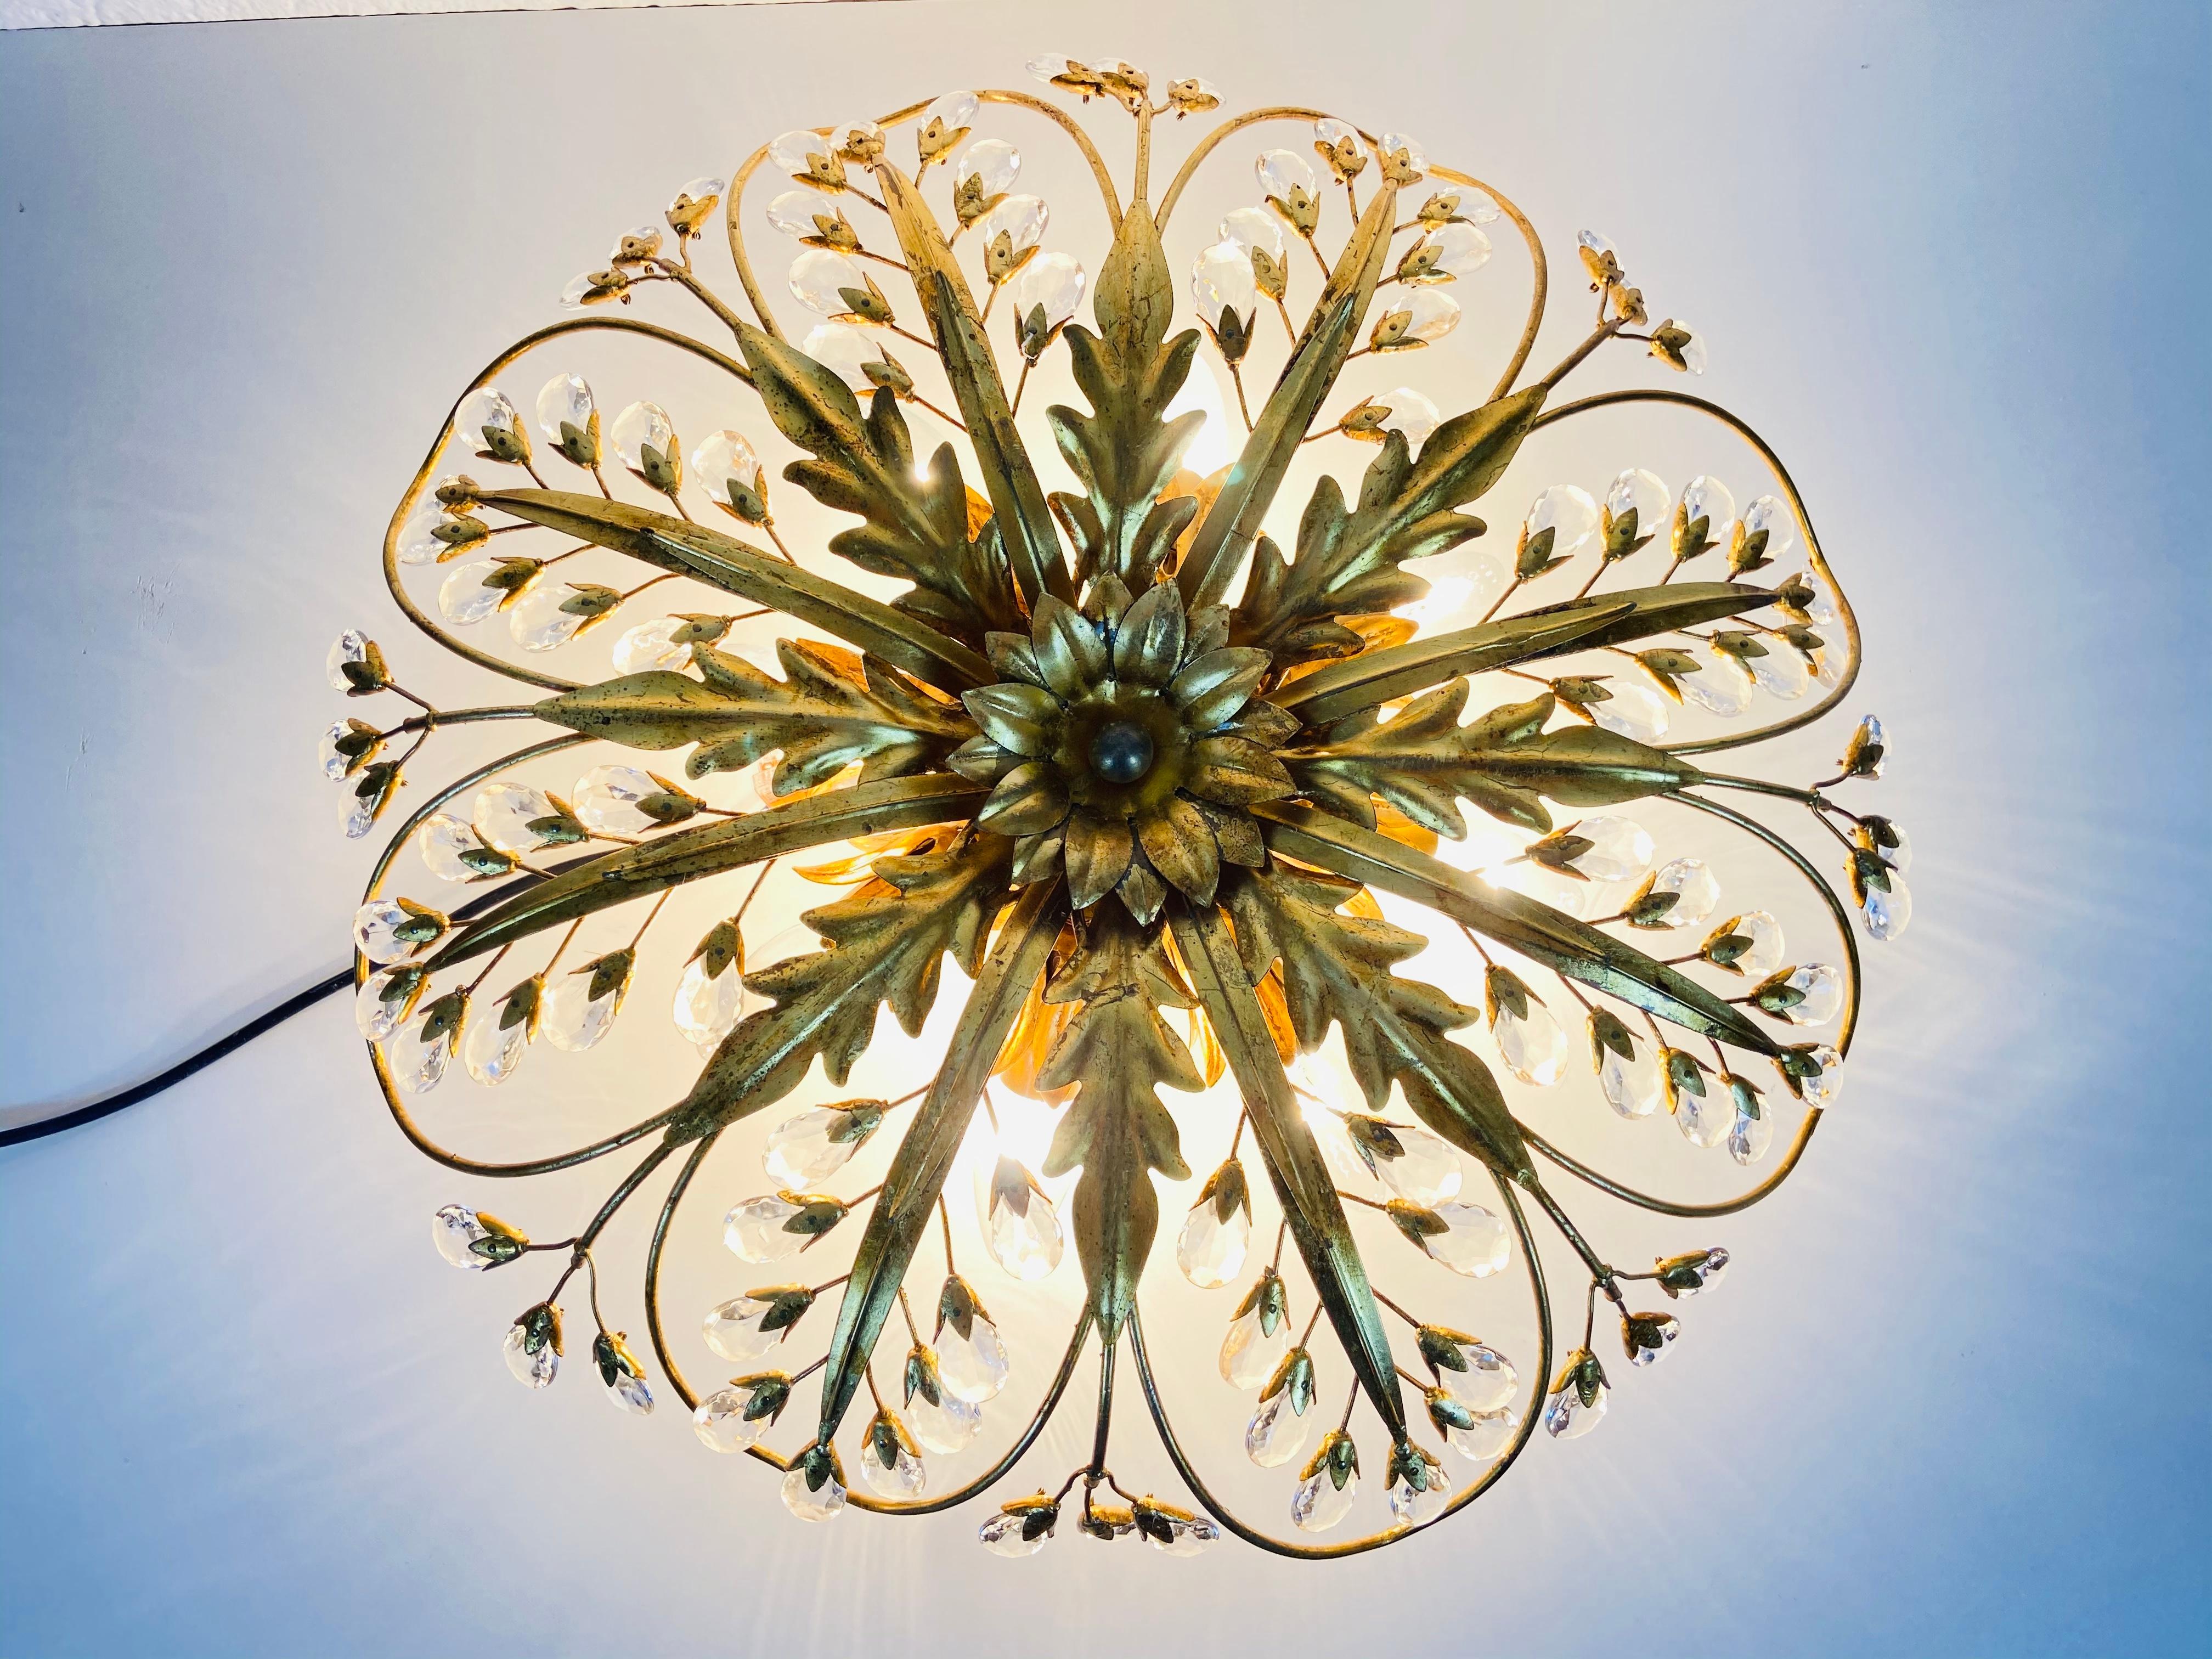 An extraordinary flushmount attributed to Banci made in Italy in the 1950s. The lamp has a beautiful wheat sheaf design. It is made in the period of Hollywood Regency. The leafs are made of Murano glass.

The light requires E14 light bulbs. Works